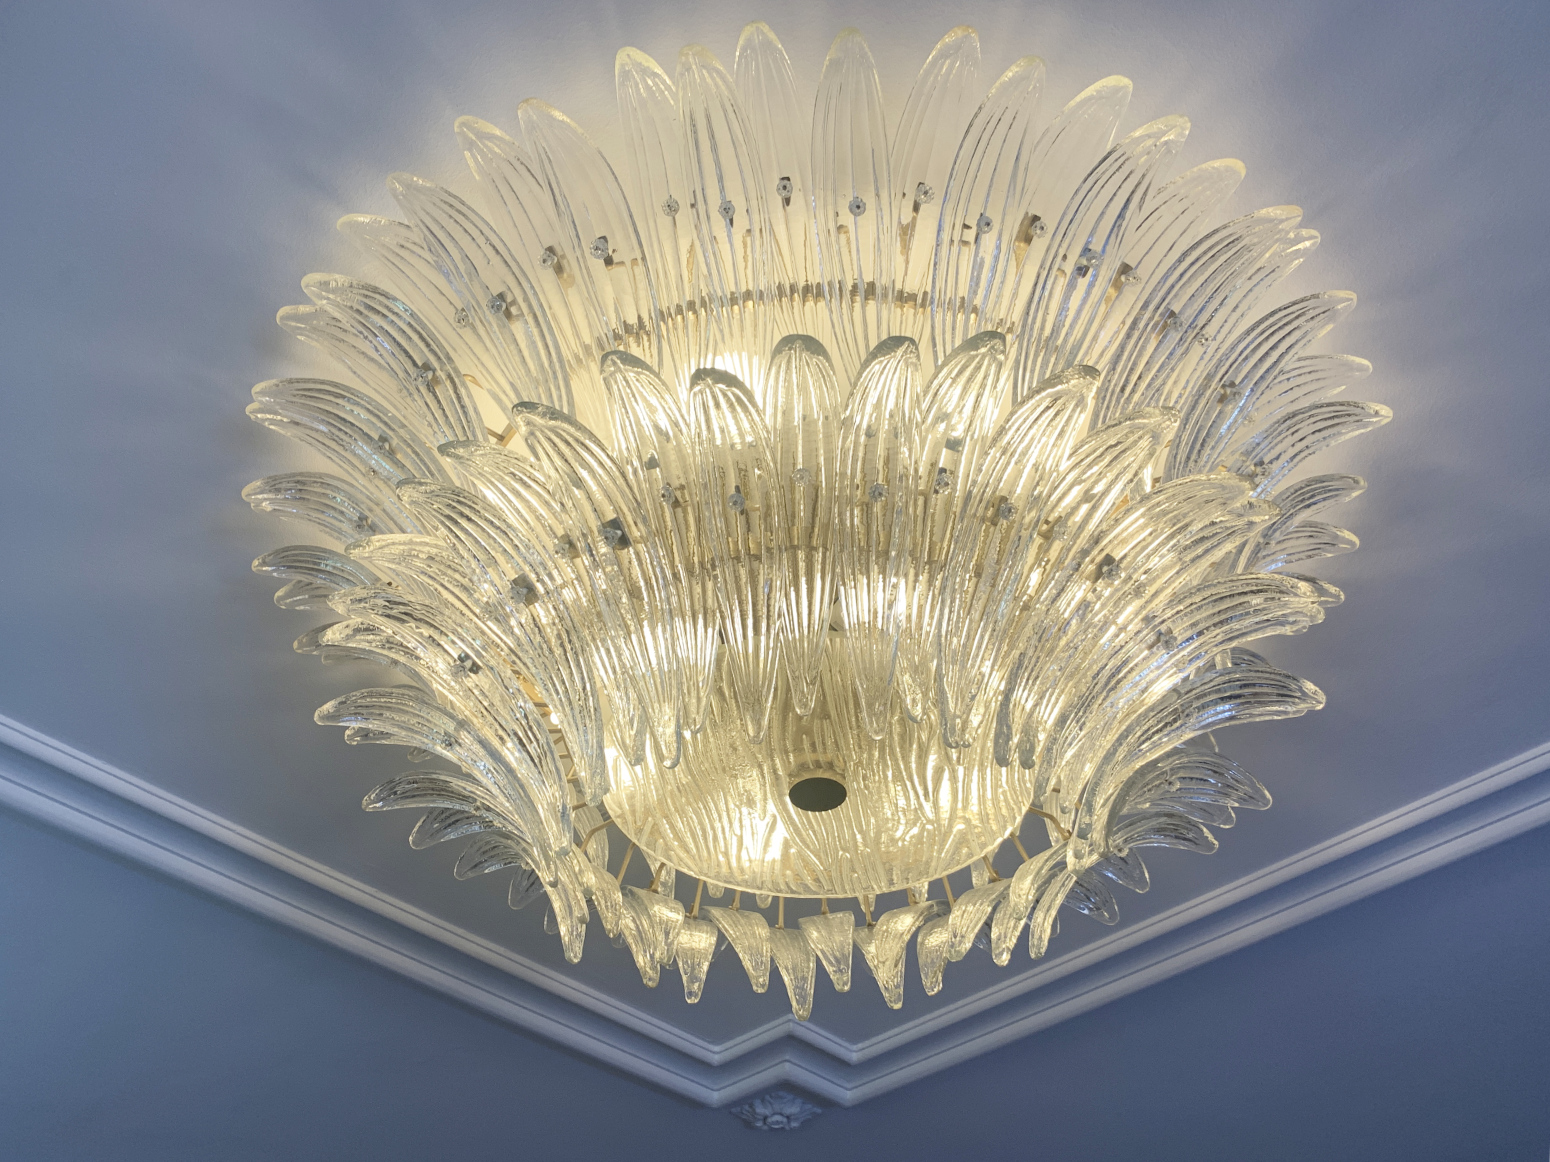 Palmette Ceiling Lamp, Flush Mount, by Barovier & Toso, Murano, Italy, 1970s. The Chandelier has 16 Lights and 96 Murano Glass Palm Leaves by Barovier & Toso